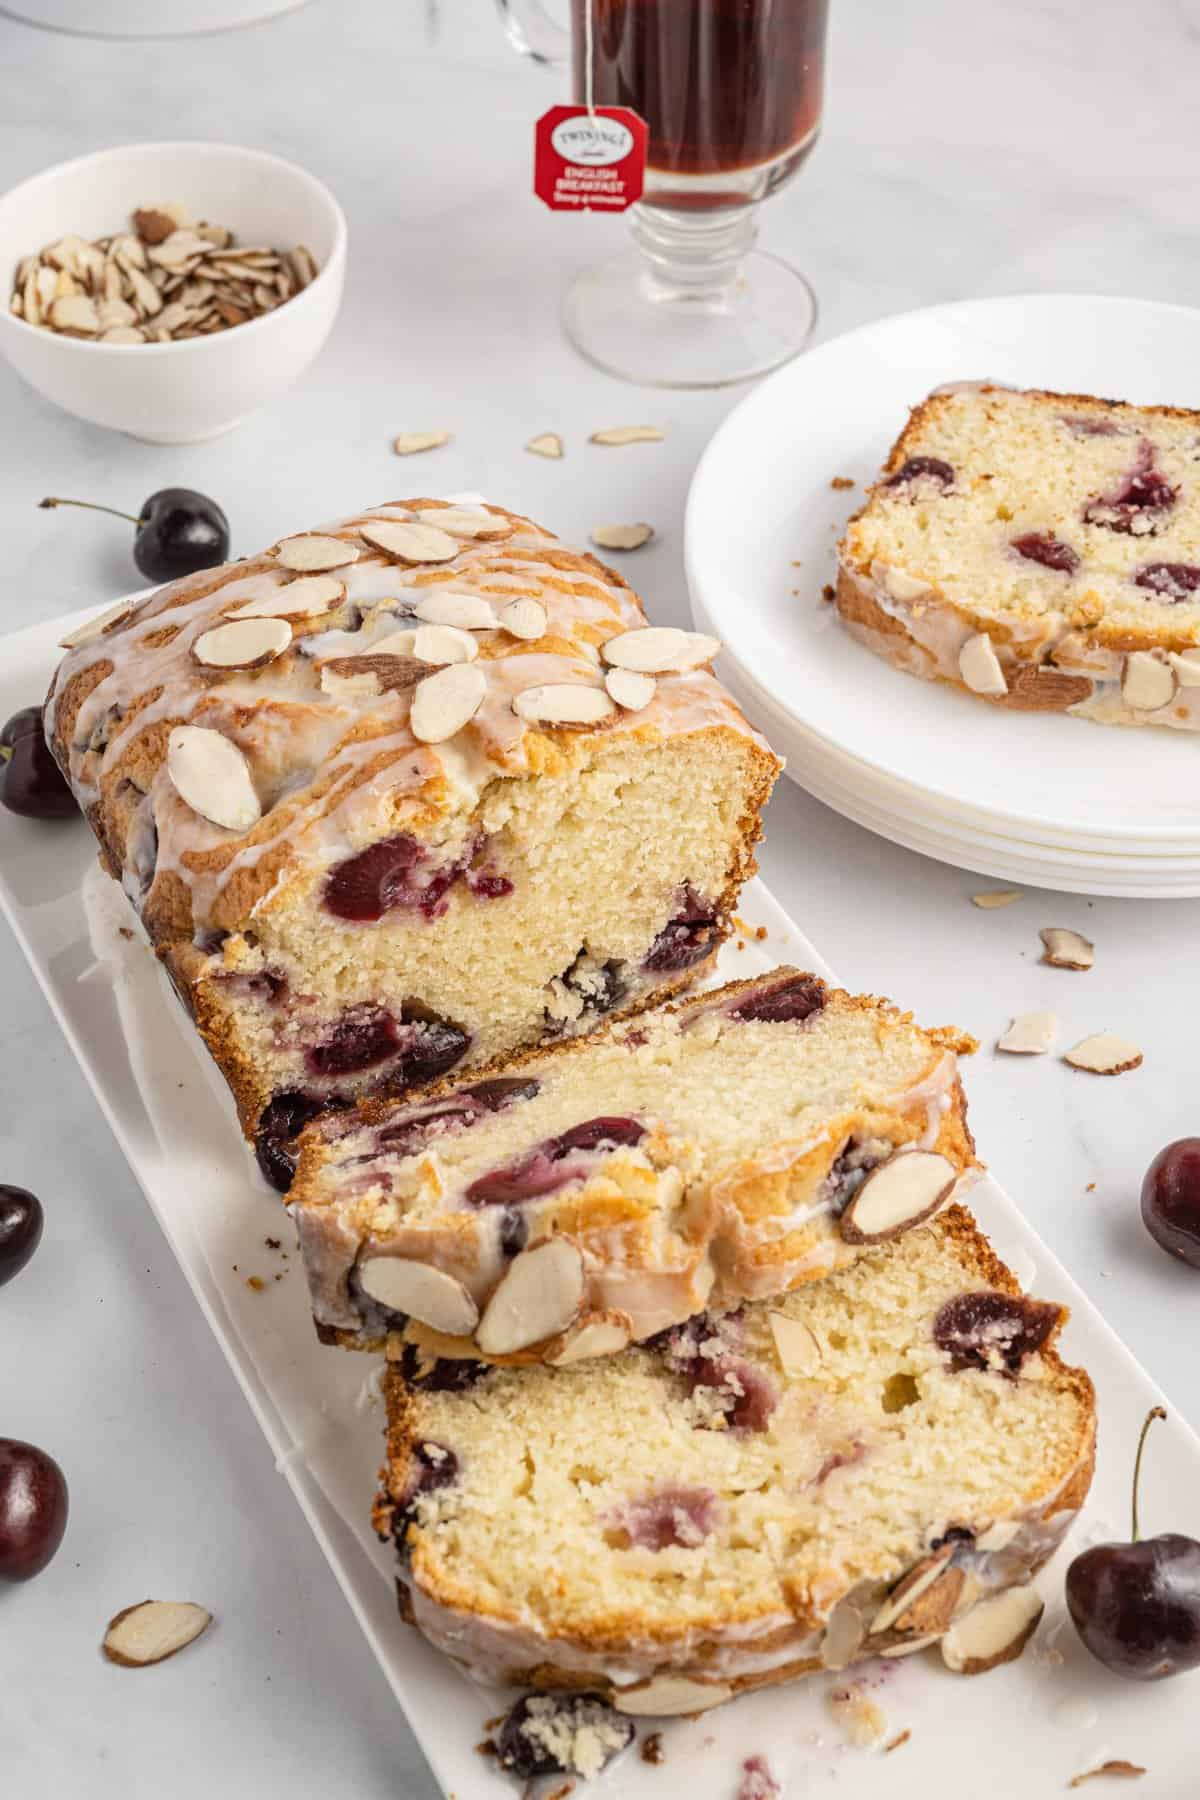 Partially sliced cherry bread on white plate with cherries scattered around.